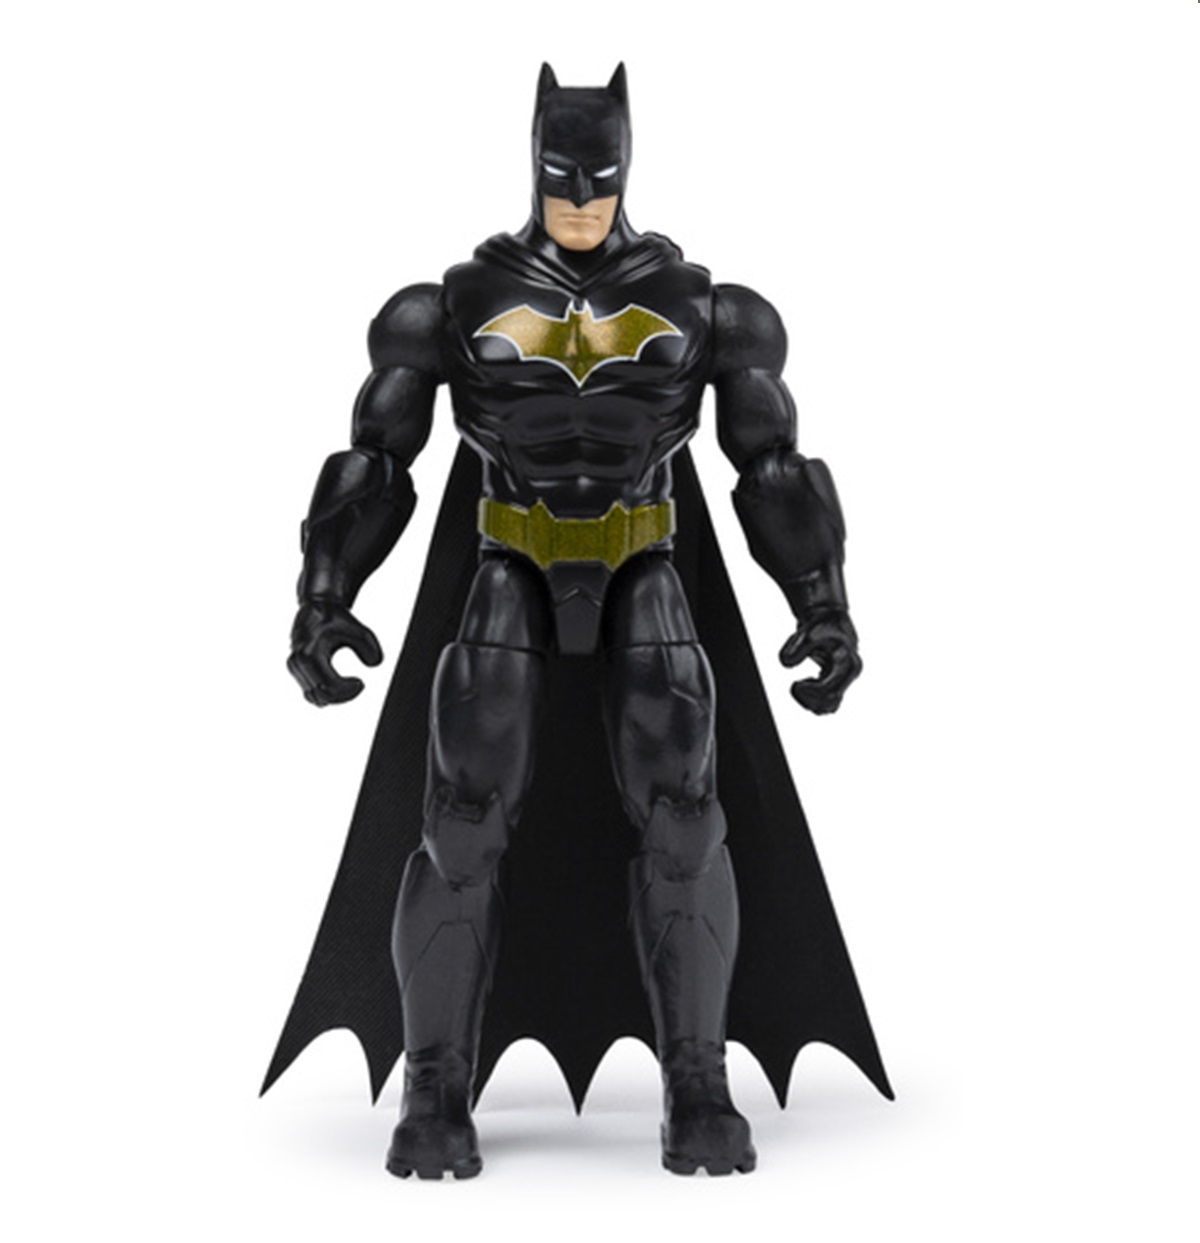 Batman Figura The Caped Crusader Exclusivo Only Target 3 Pulg